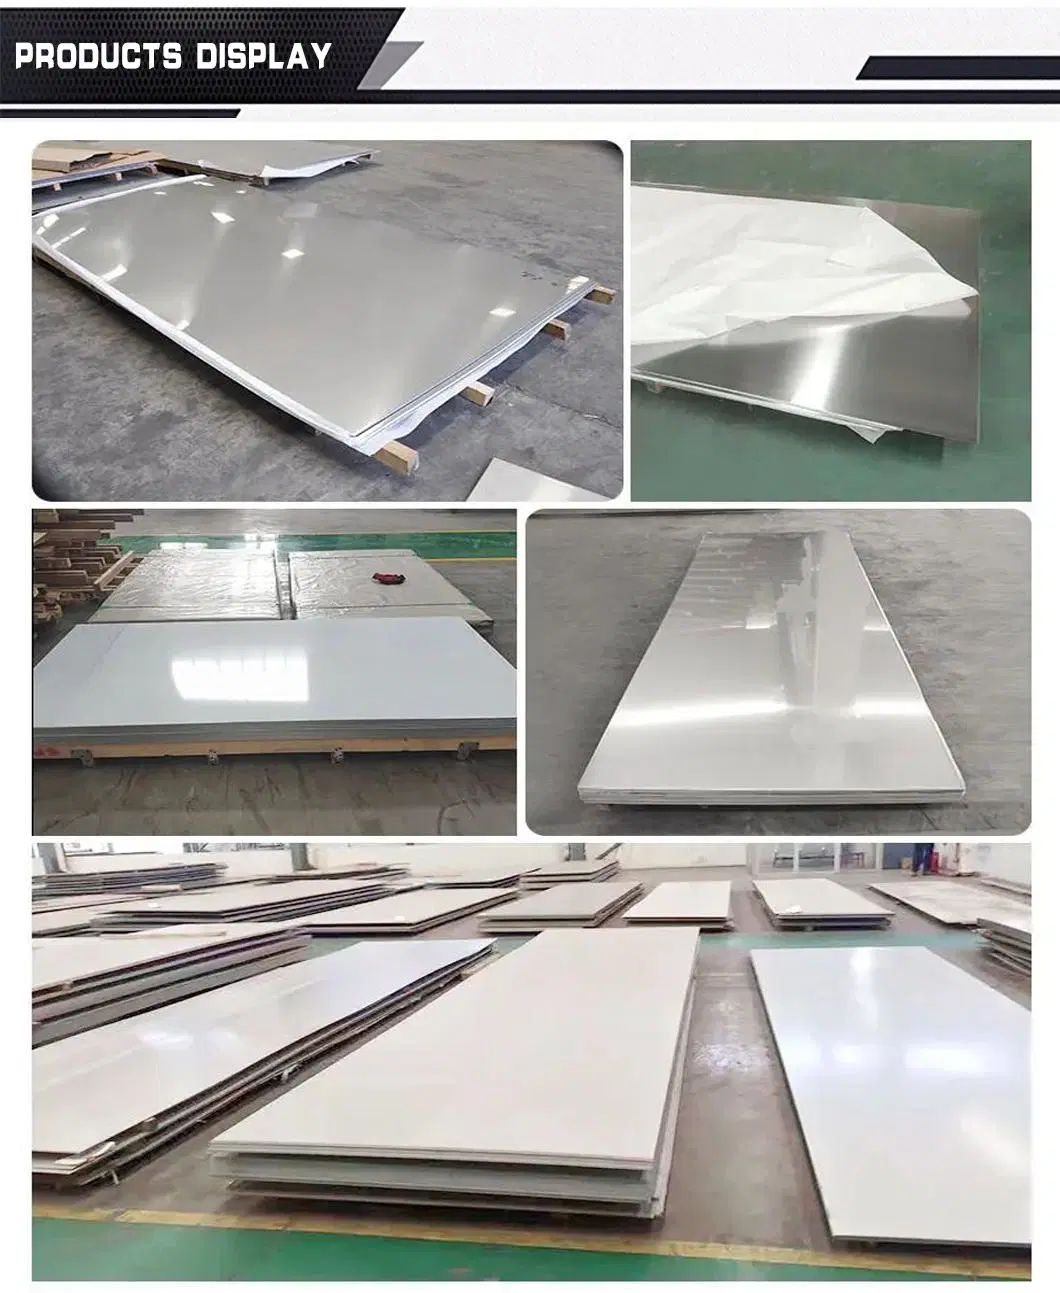 99.9% Pure Nickel 201 Alloy 75/25 CuNi Fit Plus 20 Kg Copper Nickel Alloy Cupronickel Complete Sheet/Plate